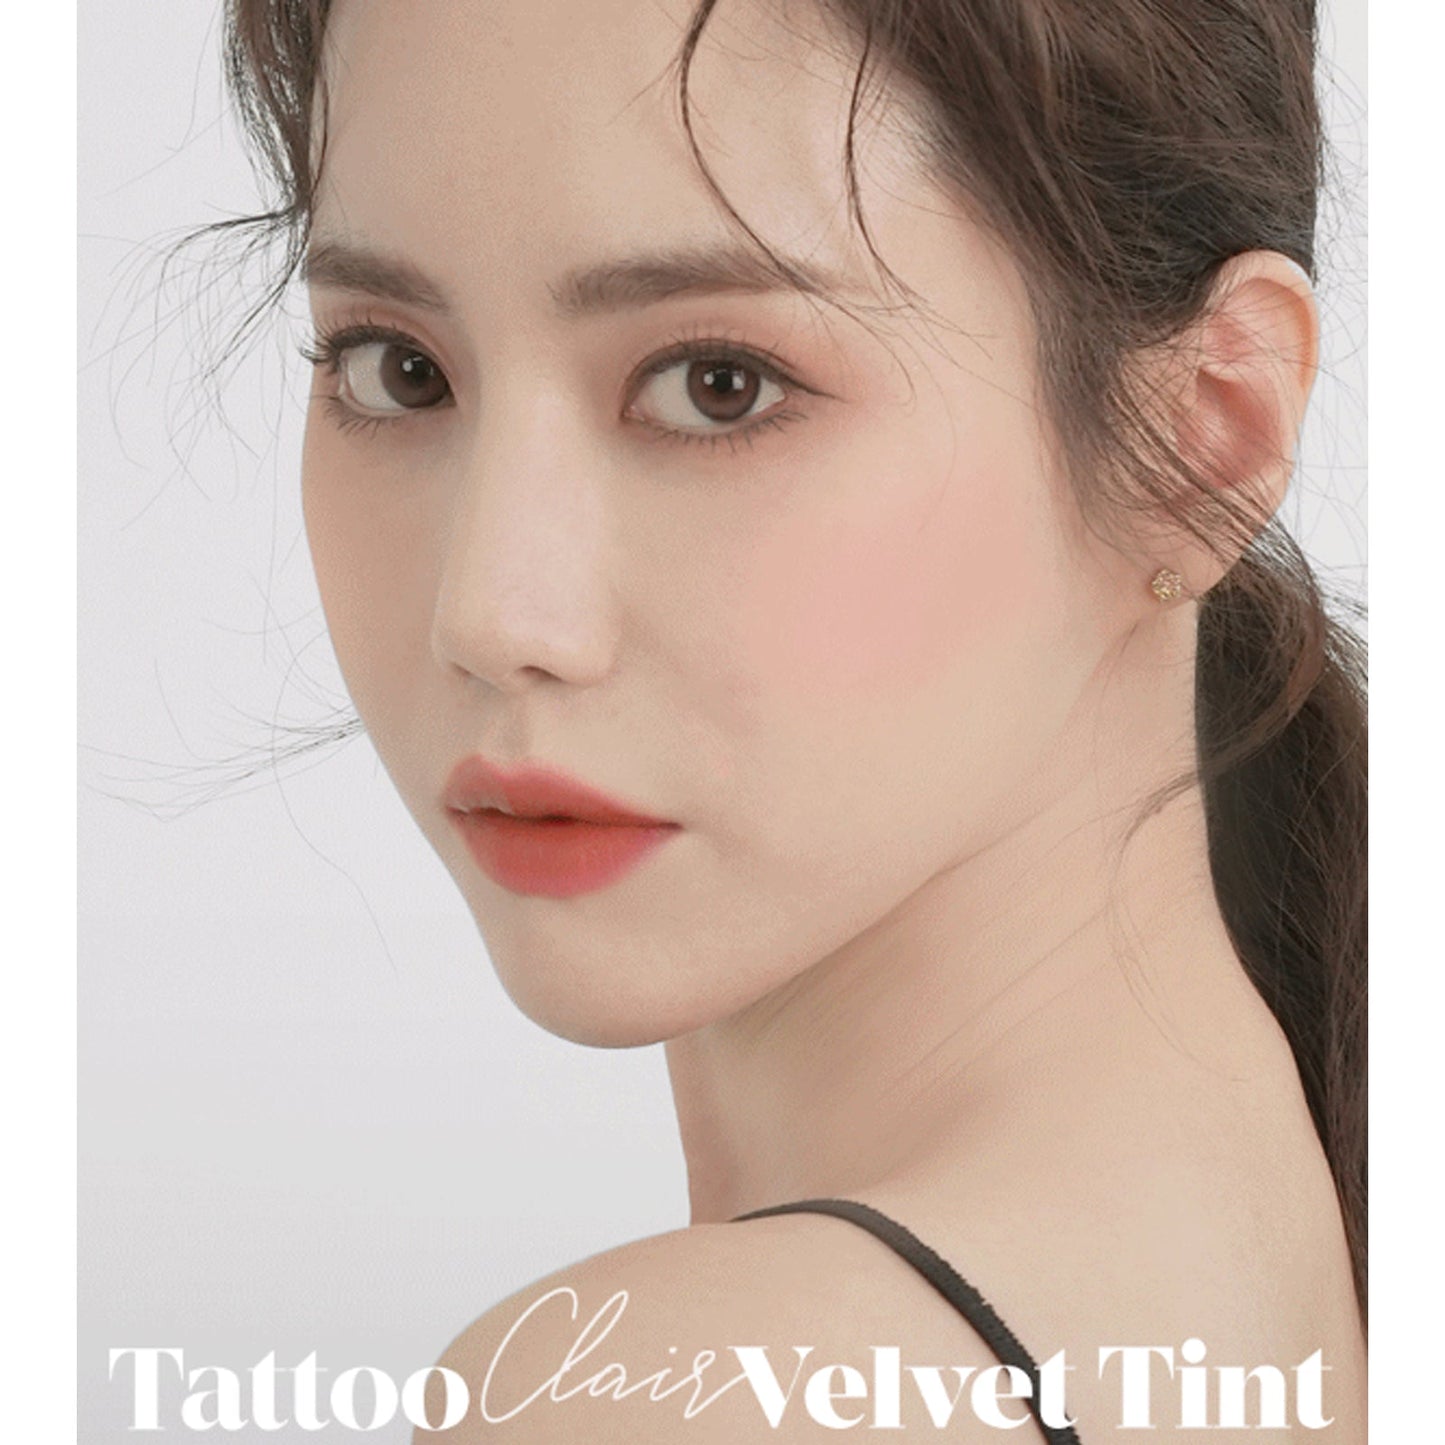 Copy of Forencos Tattoo Claire Velvet Tint 4g #21 Breathe Shade